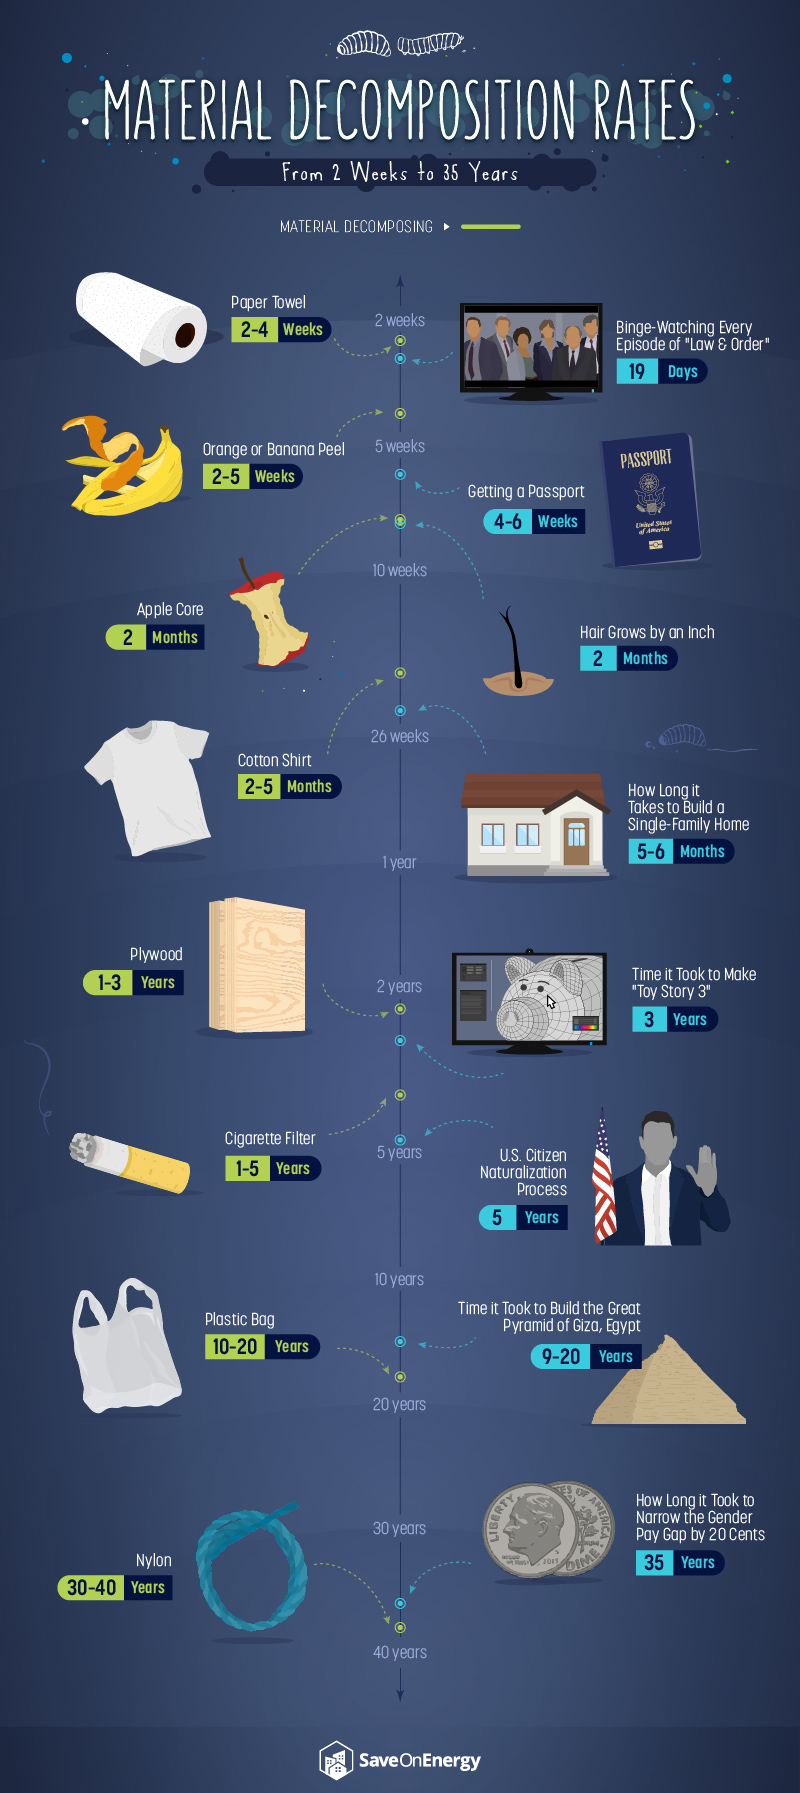 How Long It Takes Trash To Decompose [Infographic]